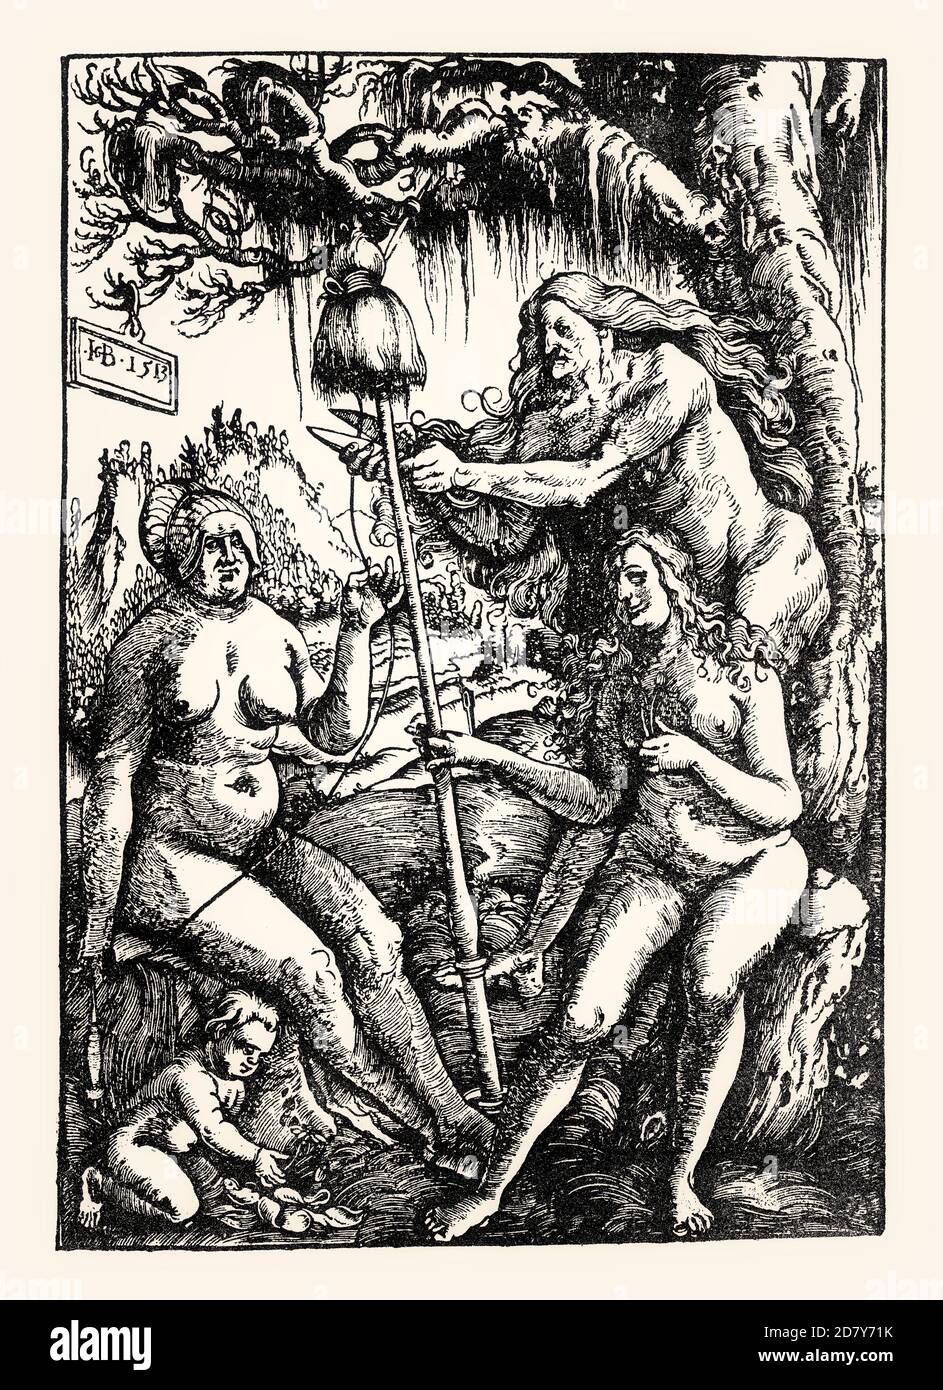 The Three Fates: Lachesis, Atropos and Clotho, by Hans Baldung Grien, 1513, facsimile of the 19th century Stock Photo